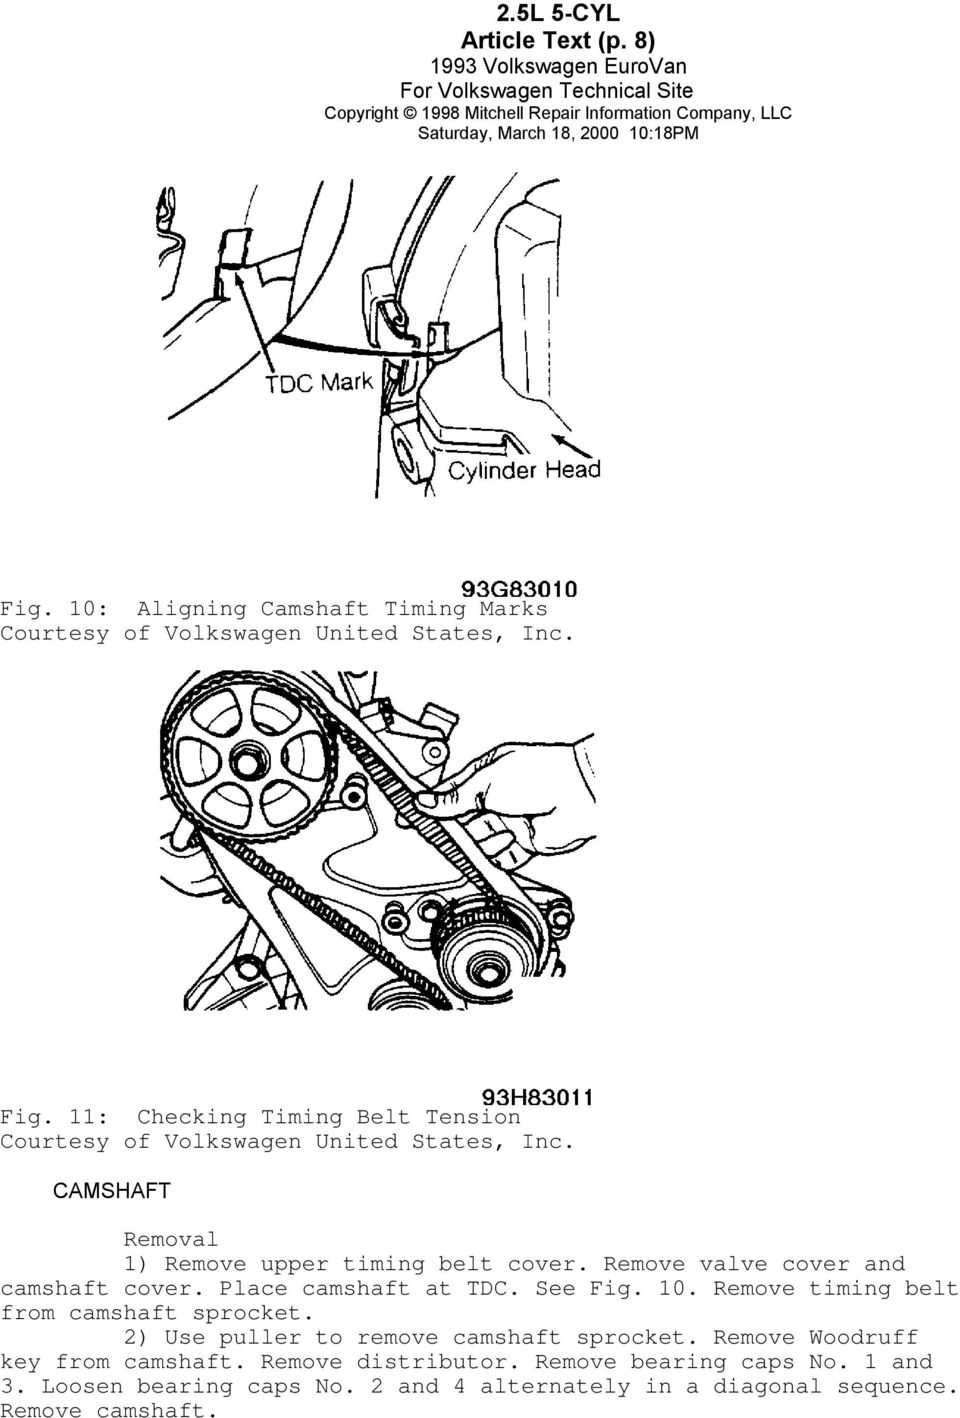 Remove valve cover and camshaft cover. Place camshaft at TDC. See Fig. 10. Remove timing belt from camshaft sprocket.